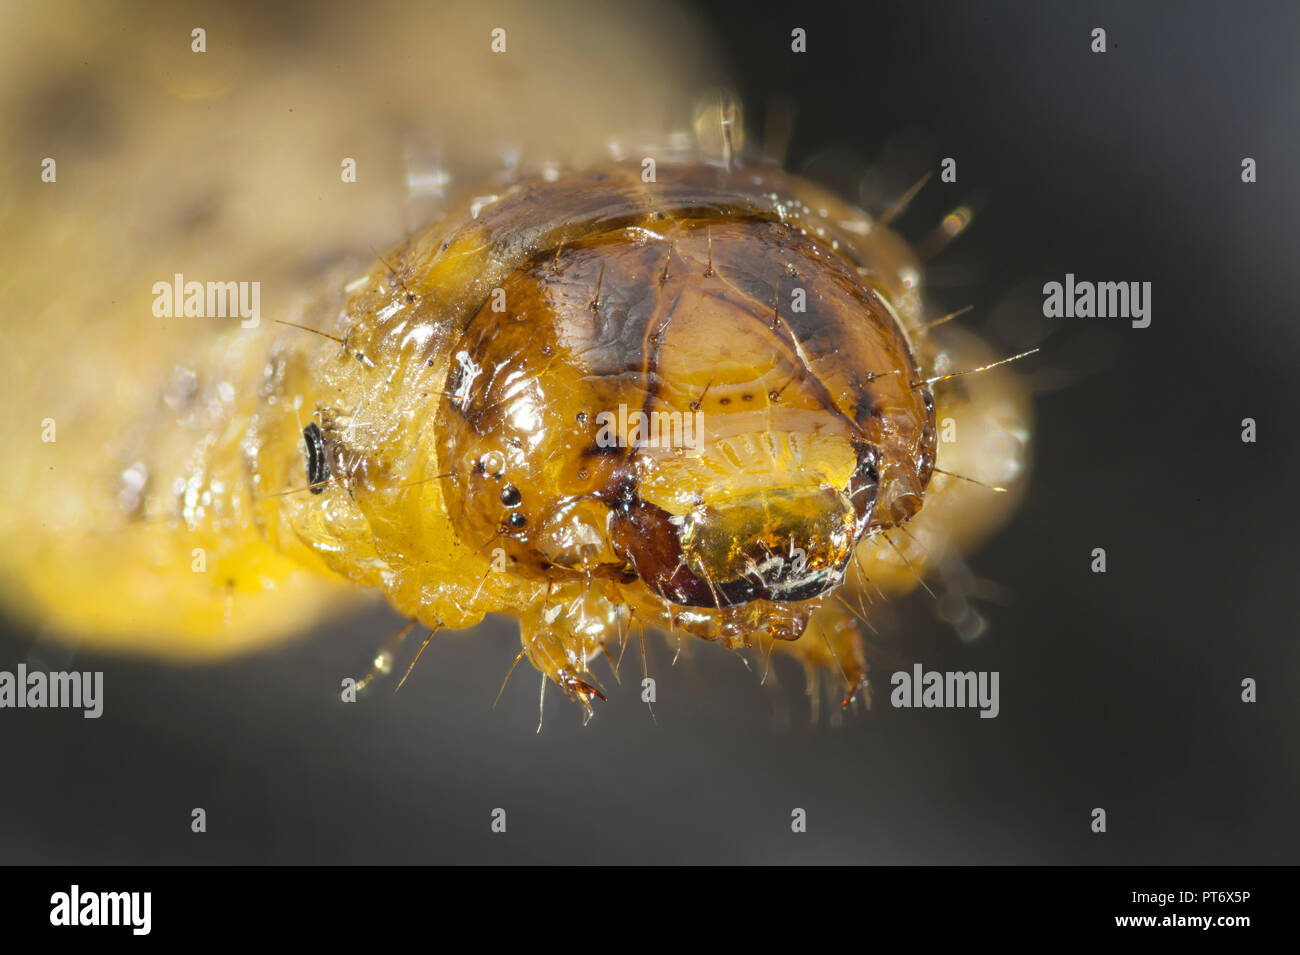 Noctuid moth or owlet moth larva, cutworm or armyworm, high macro view of head, mouthparts, eyes Stock Photo